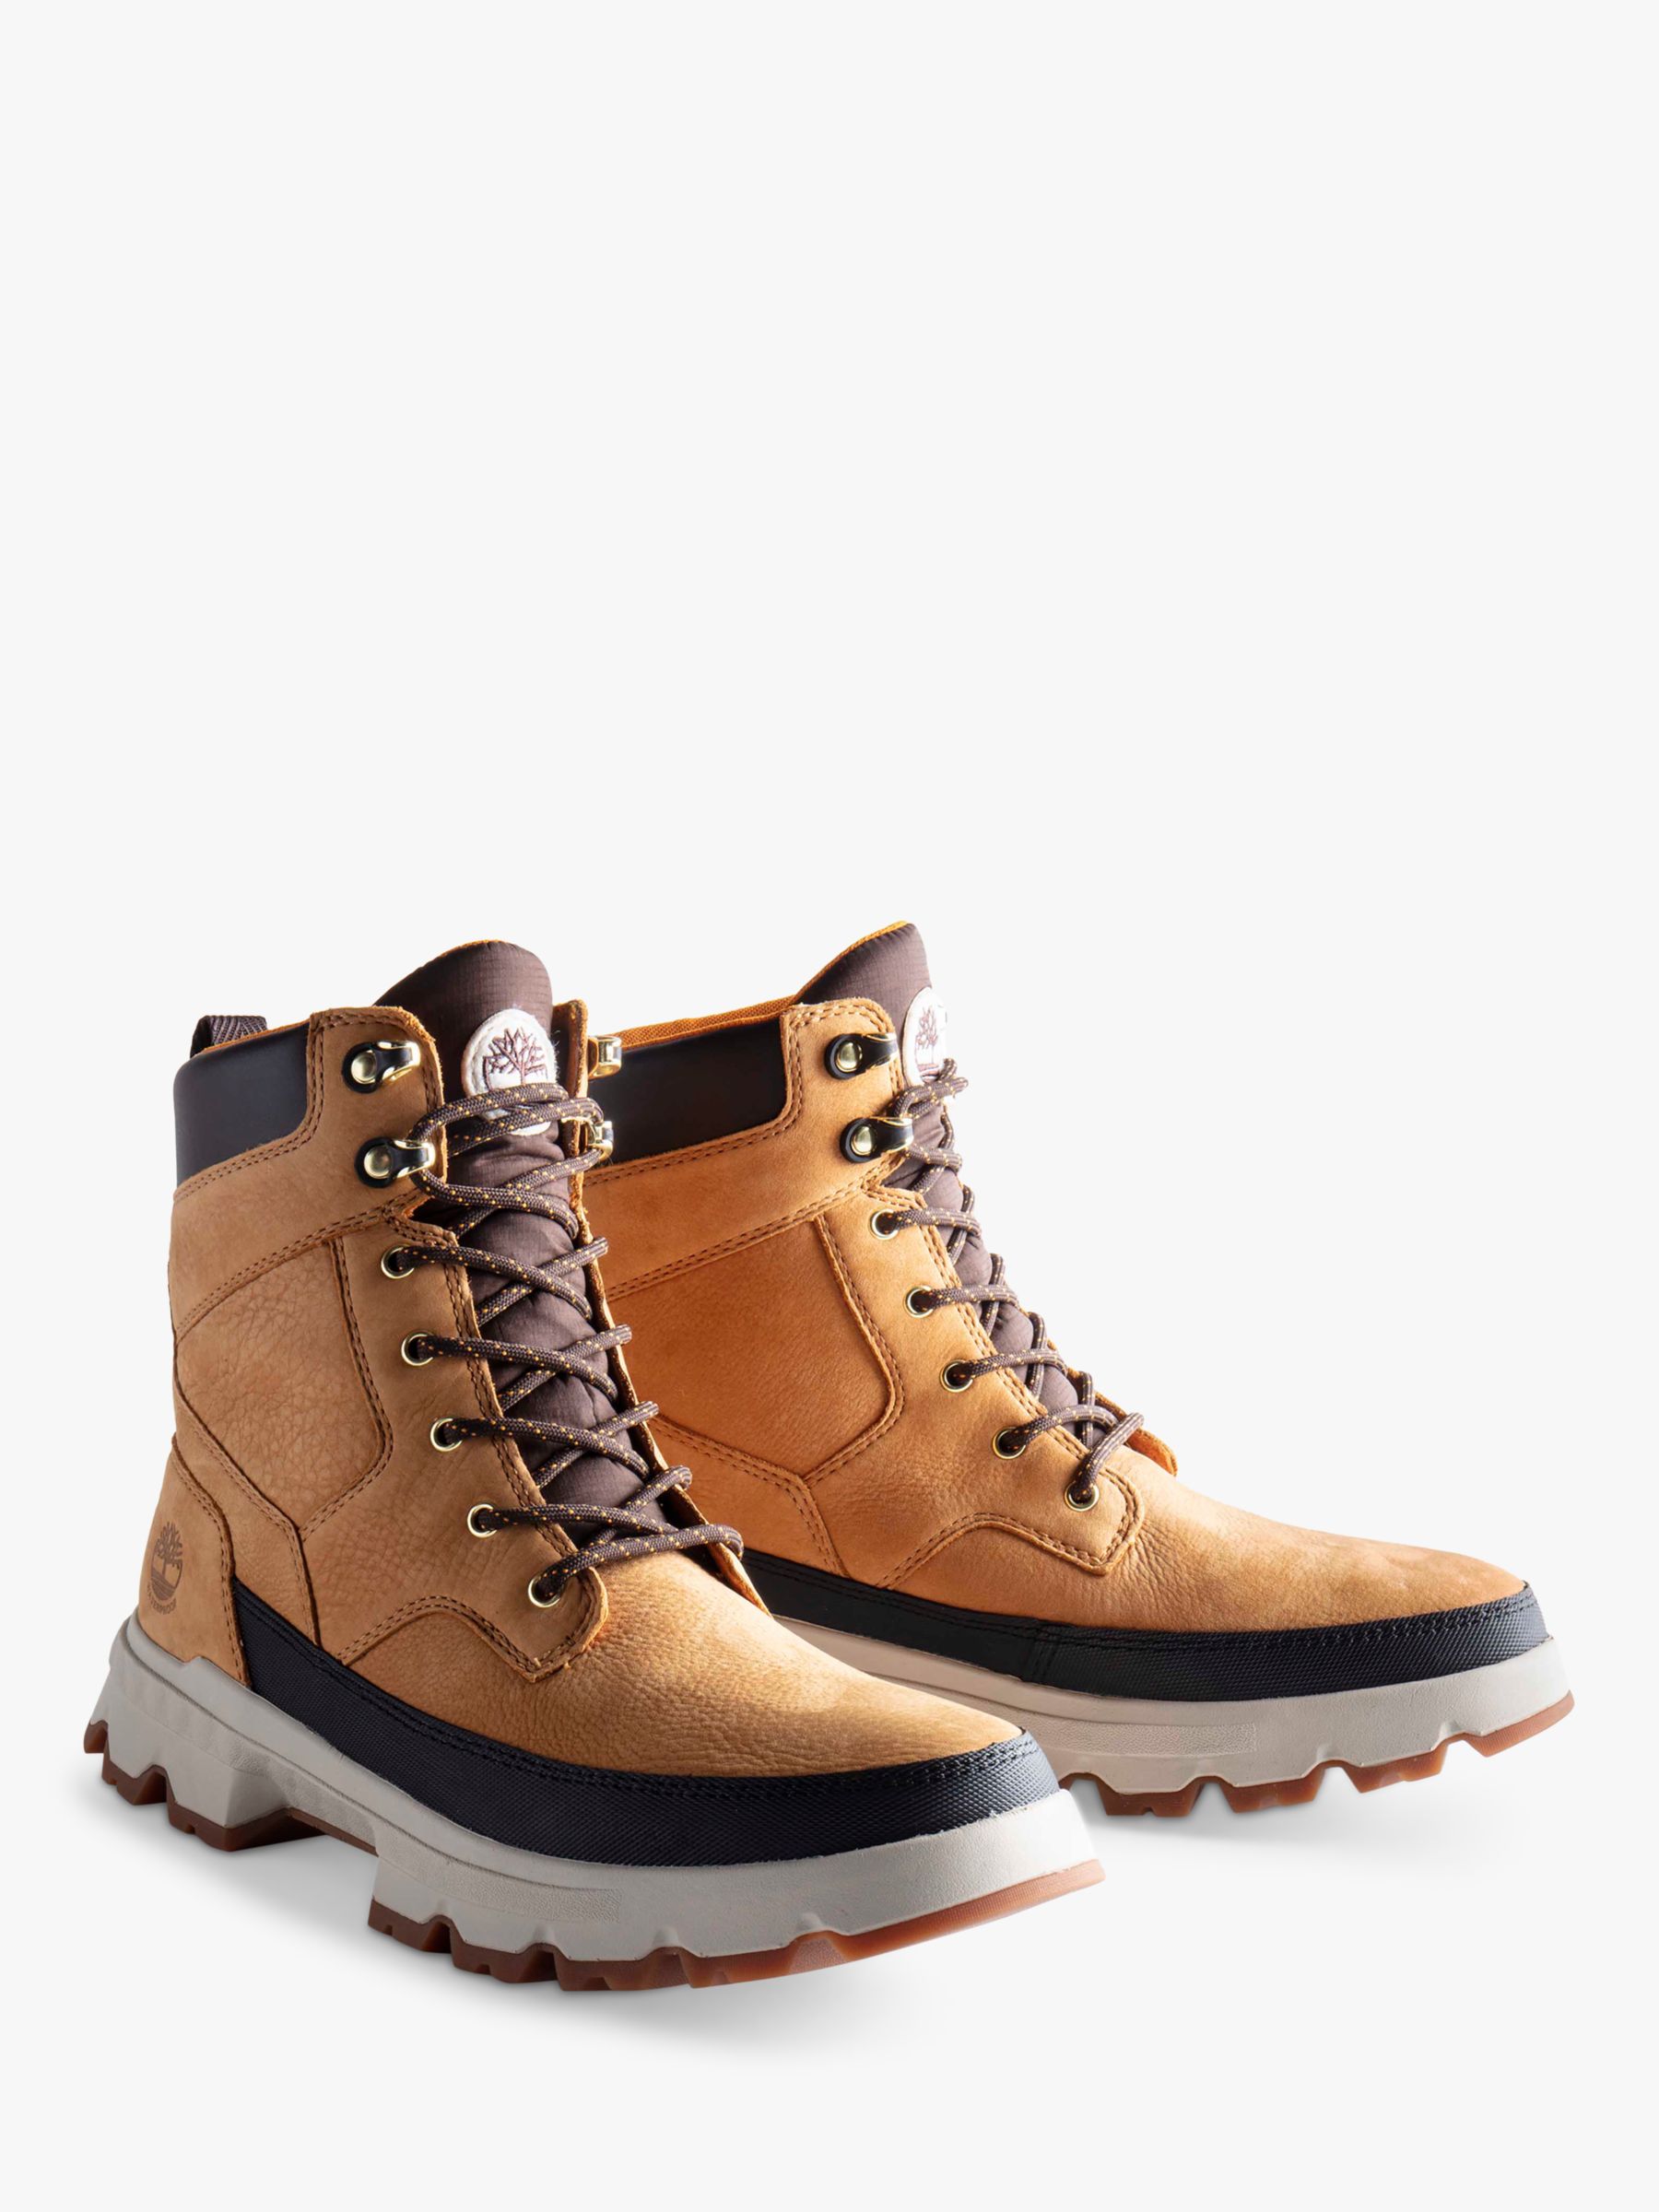 intercambiar grueso amanecer Timberland Ultra Waterproof 6" Leather Chukka Boots, Wheat at John Lewis &  Partners